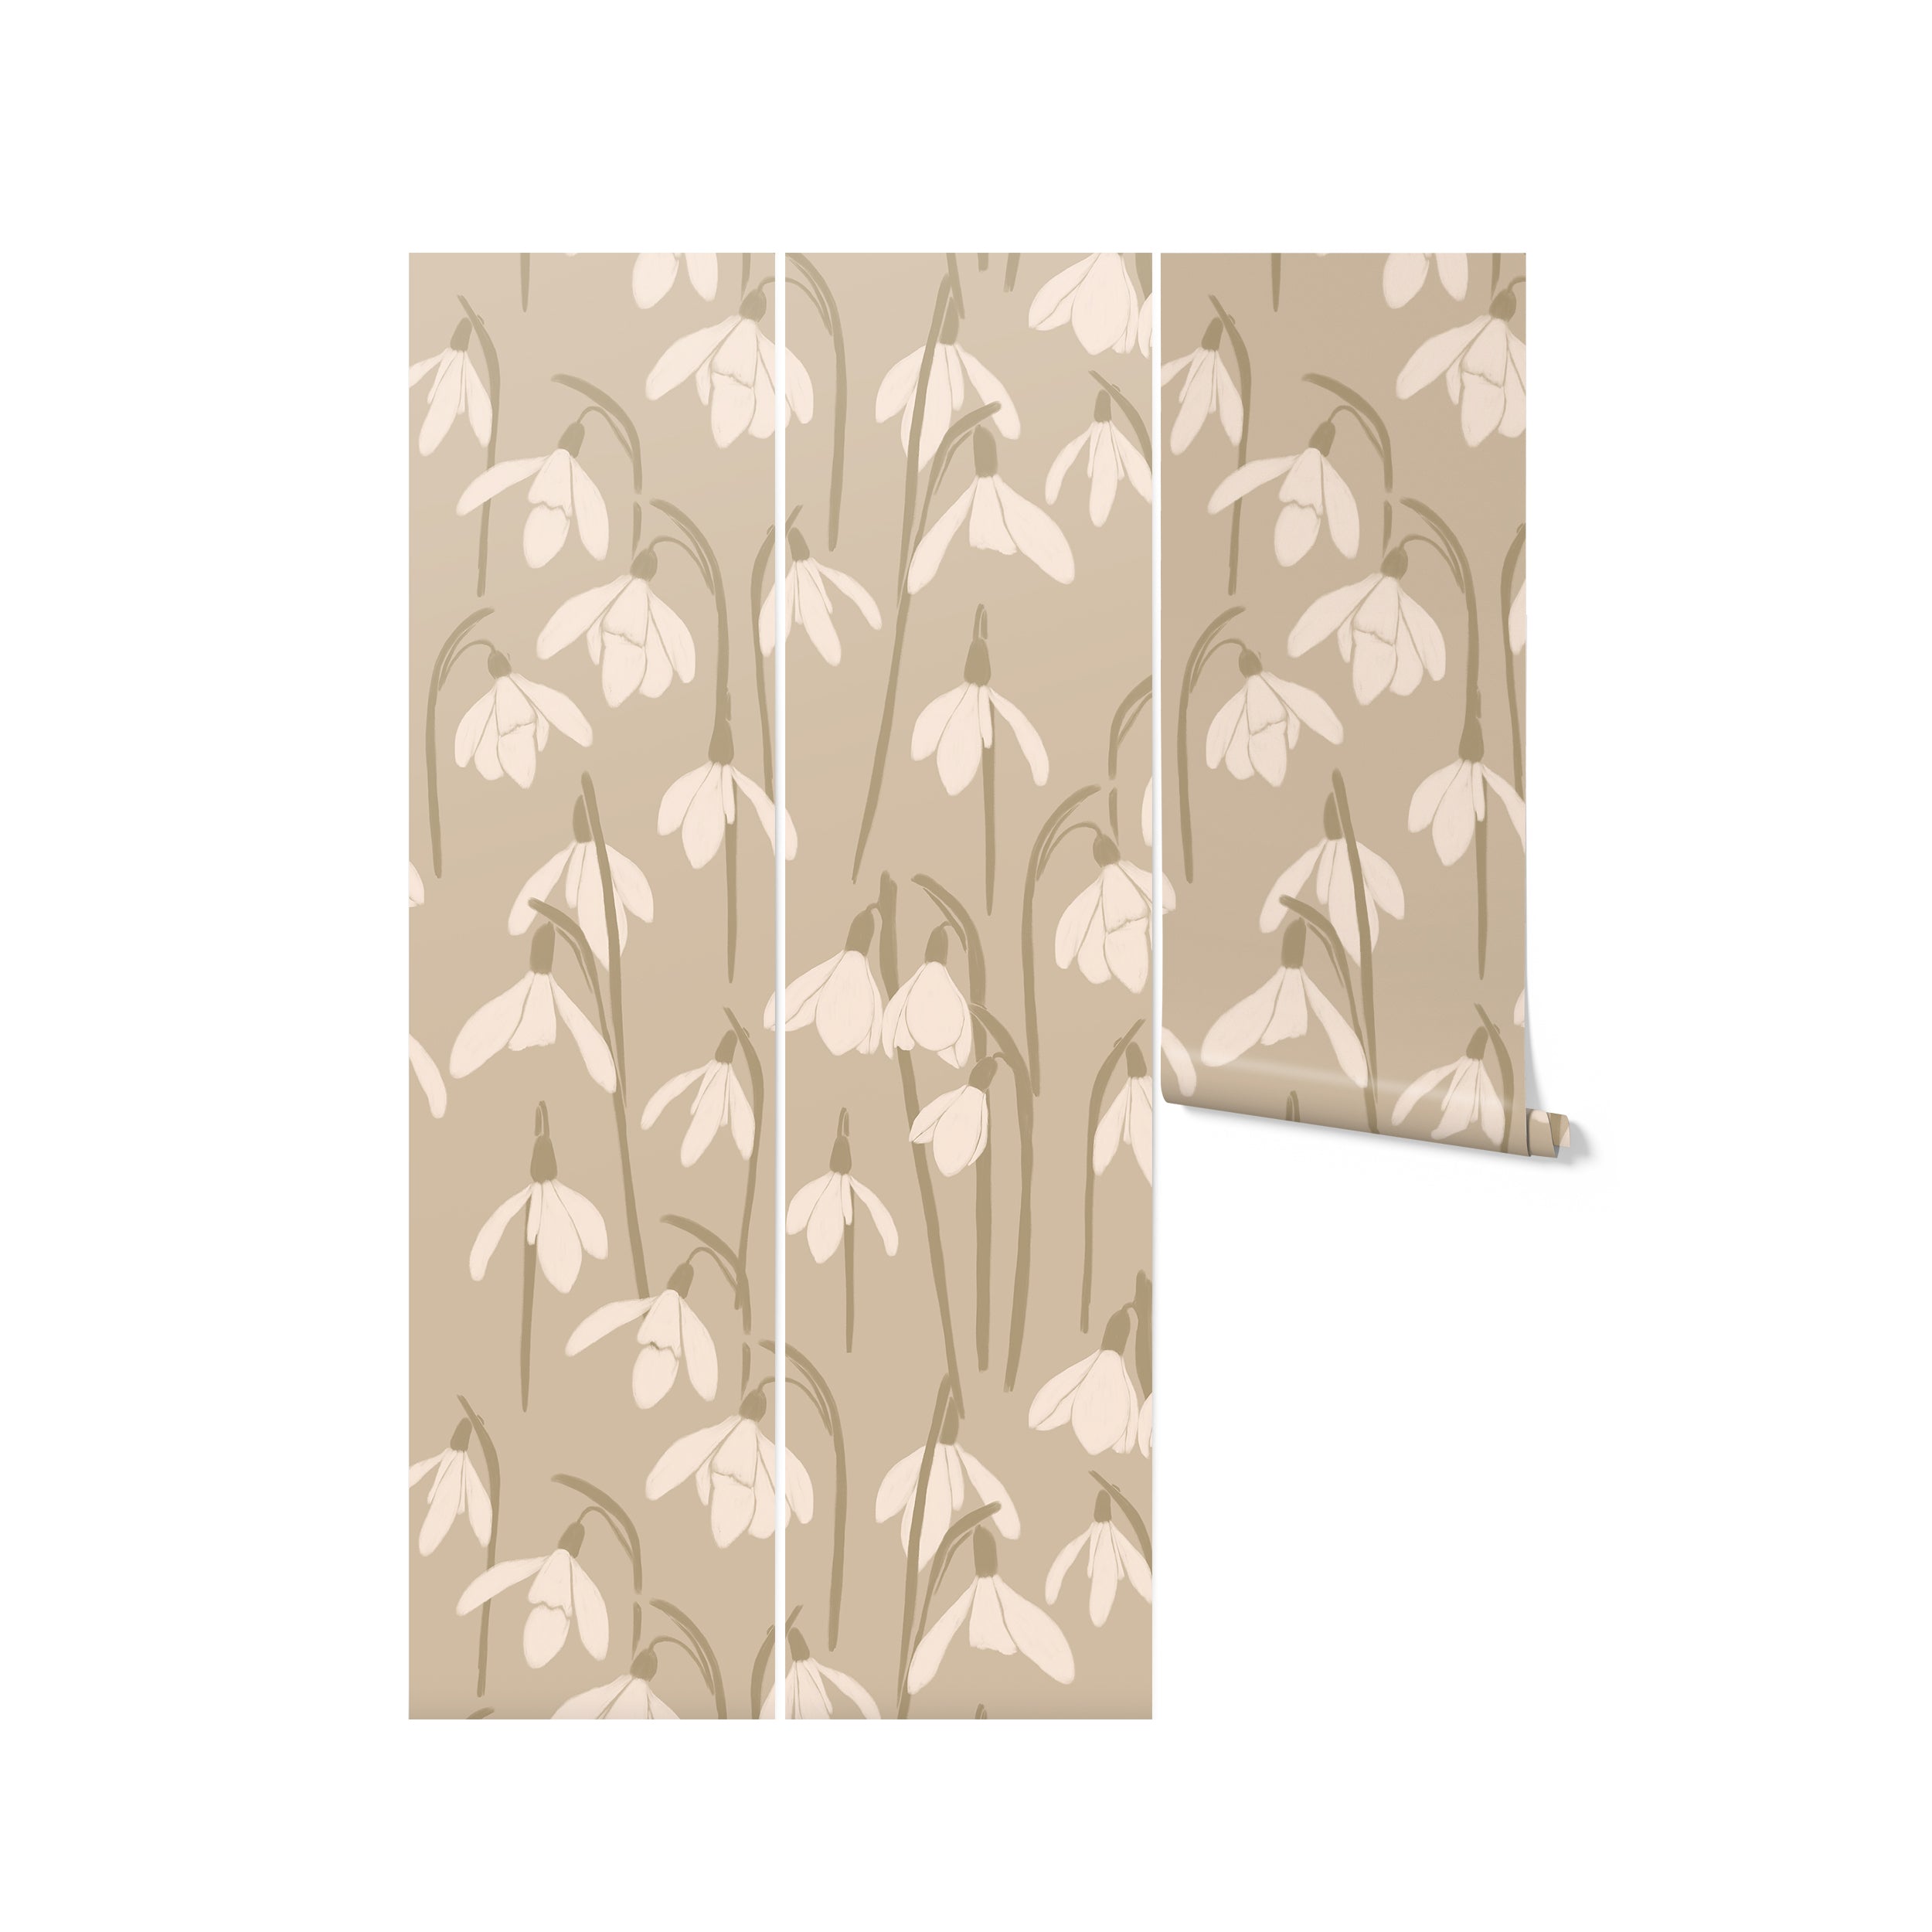 A roll of Snowdrop Wallpaper, partially unrolled to reveal a pattern of white snowdrop flowers with green stems on a beige background, emphasizing the wallpaper's elegant and timeless design.